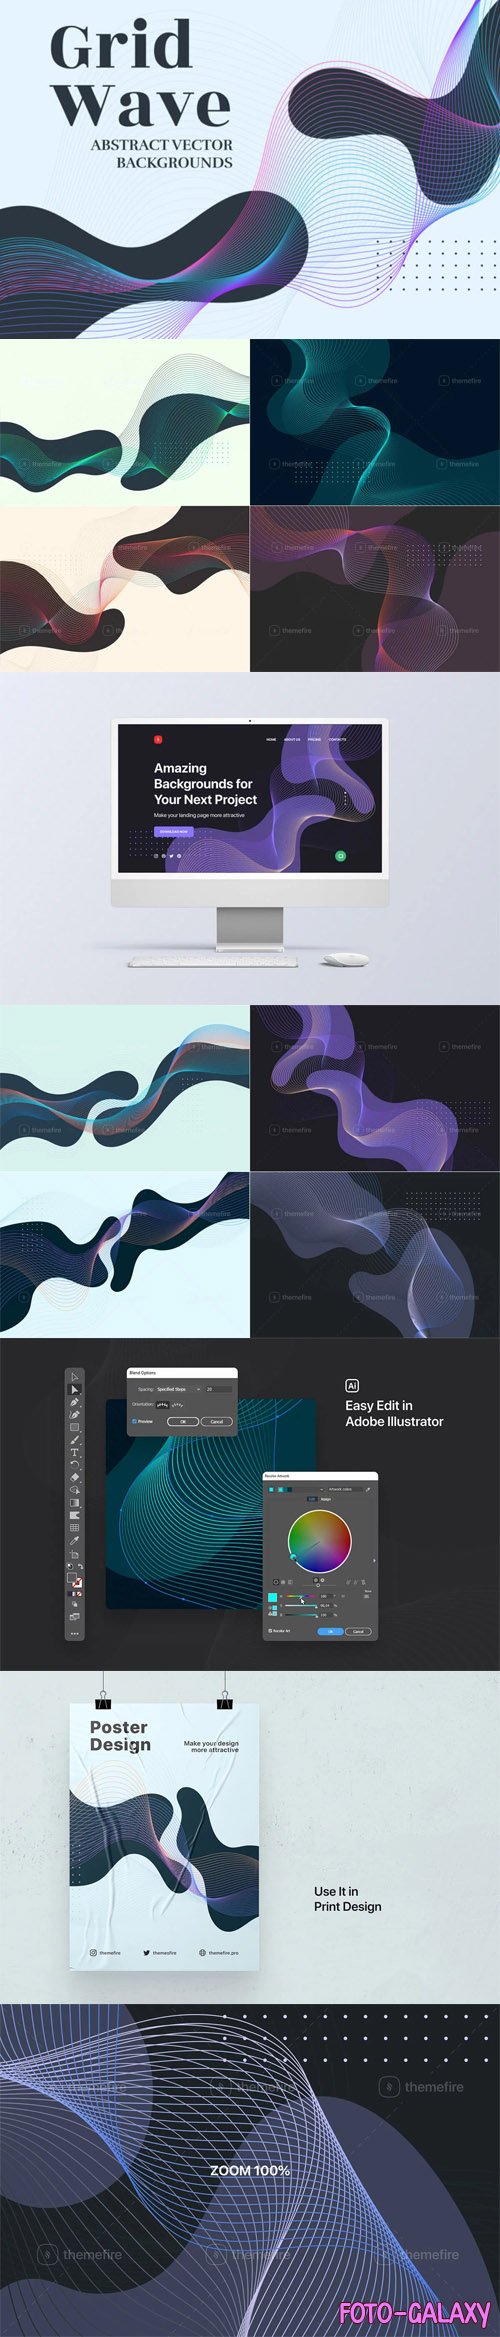 Flat Splash & Grid Wave - Abstract Vector Backgrounds